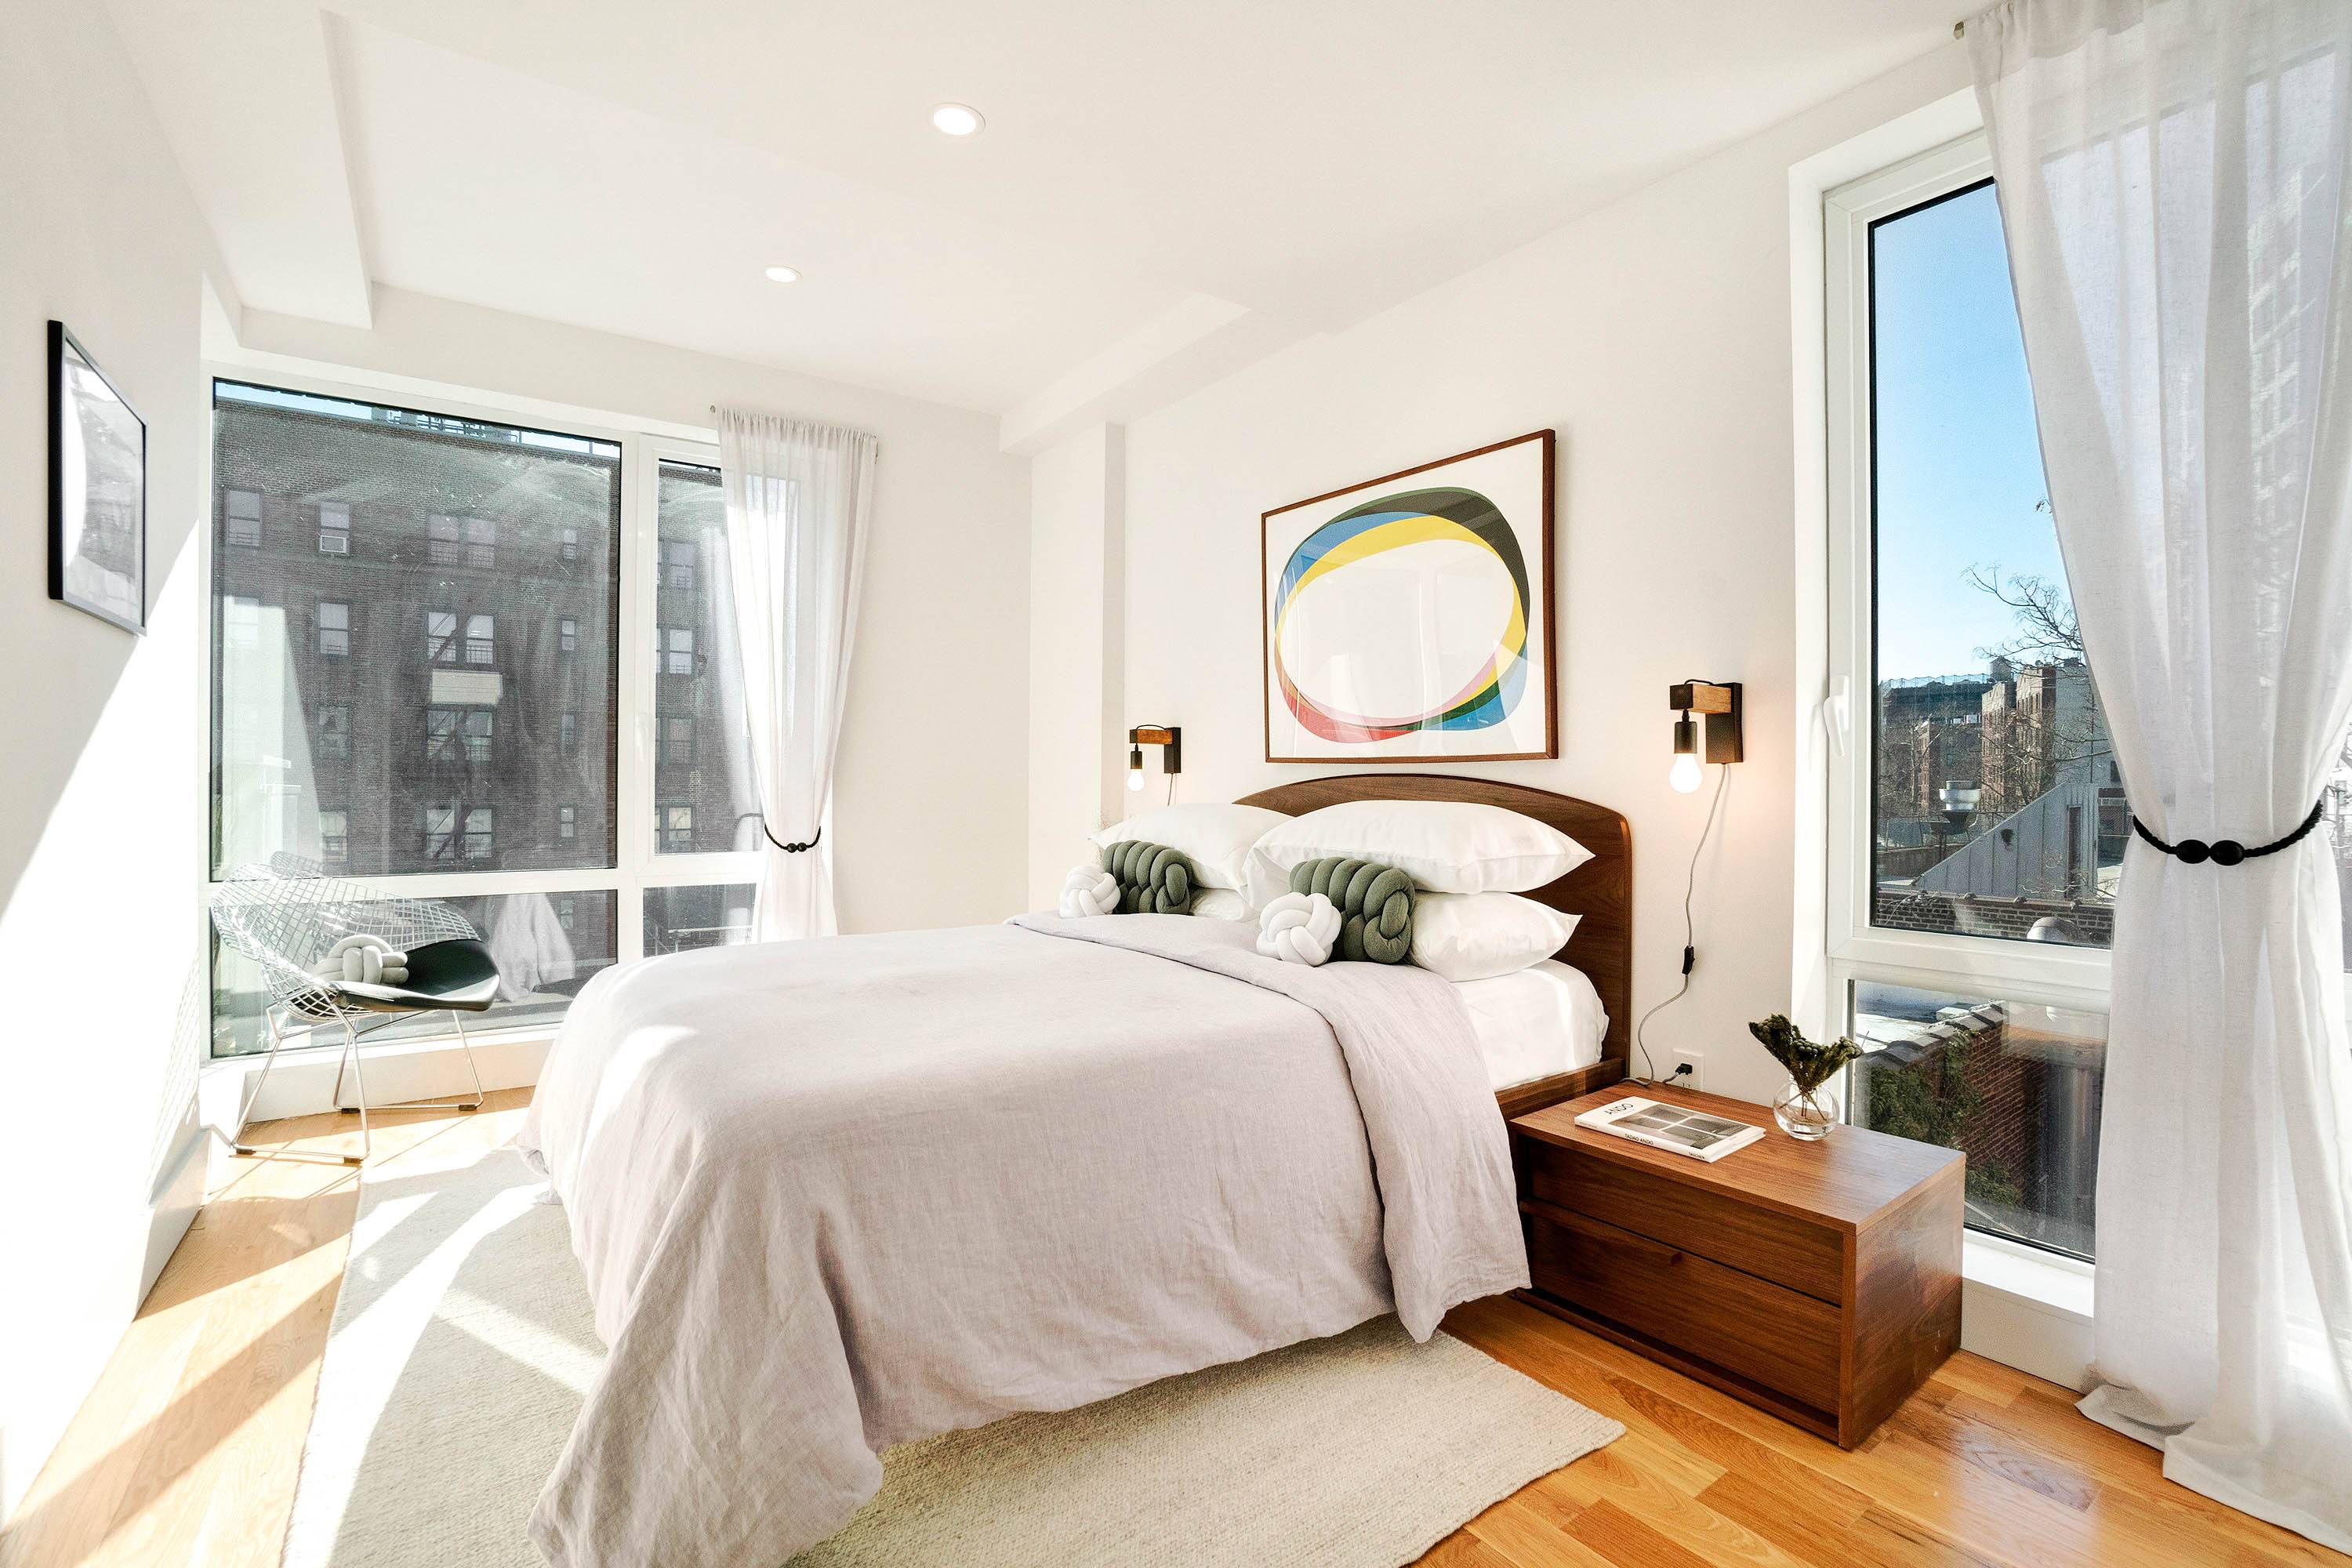 No Fee 2 Bed 1 Bath The Cambridge located at 2155 Caton Ave is a finely detailed 30 unit boutique rental building in Prospect Lefferts Garden, Brooklyn.